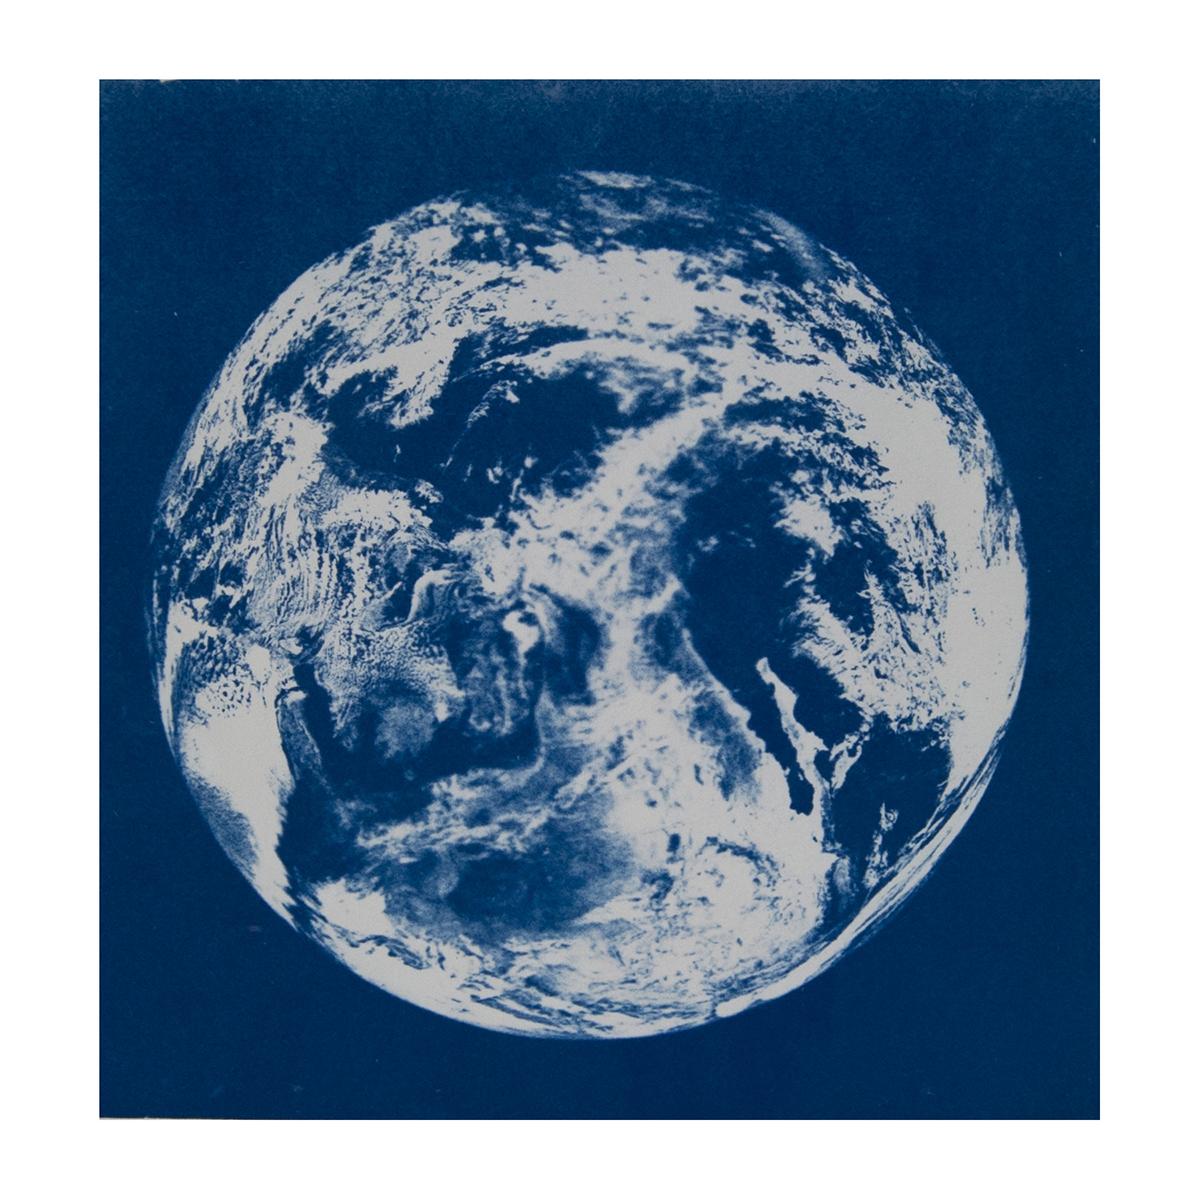 A cyanotype of Earth, appearing in blue and white